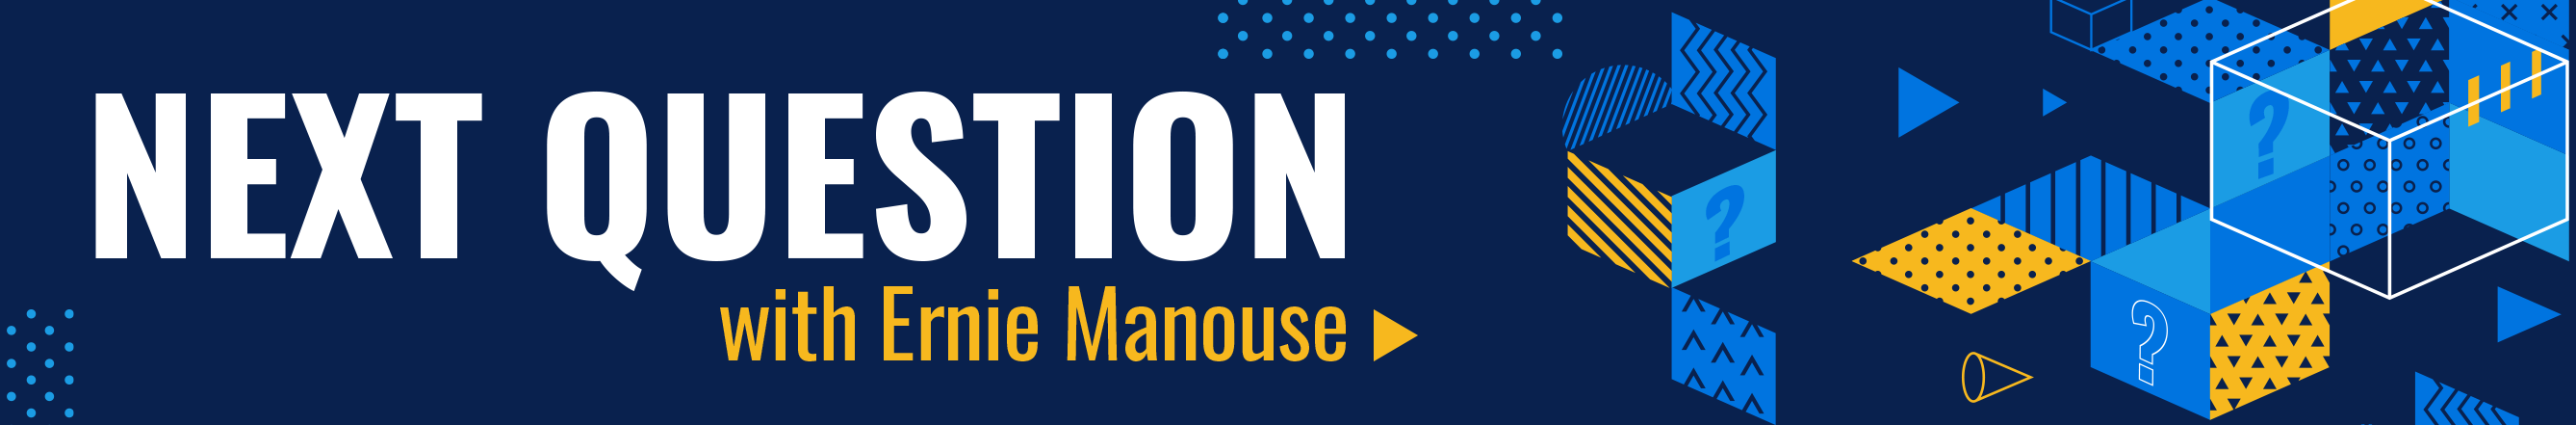 Next Question with Ernie Manouse page banner